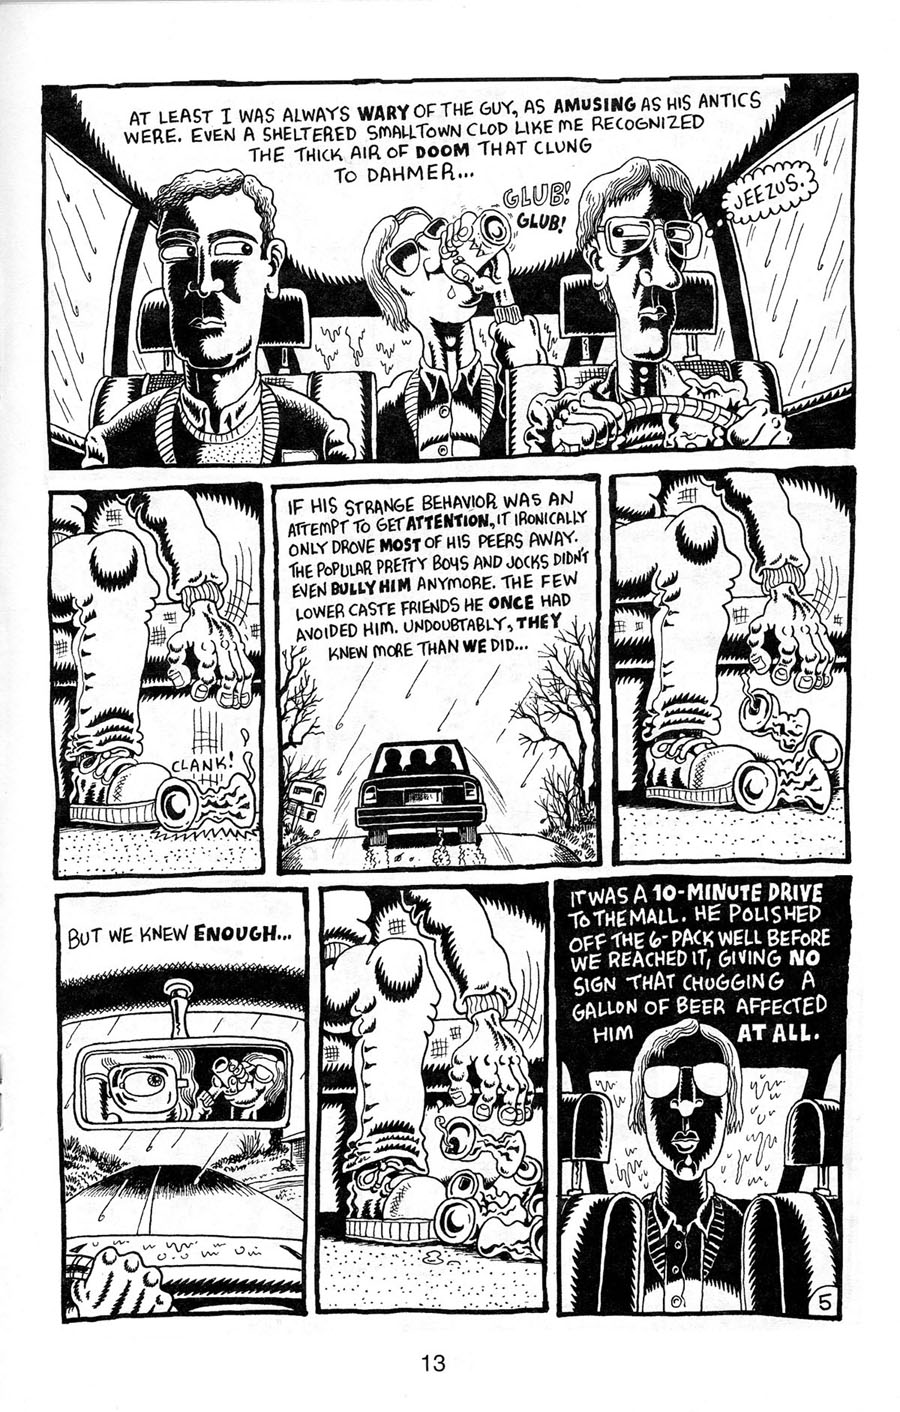 Page from “My Friend Dahmer,” March 1, 2012